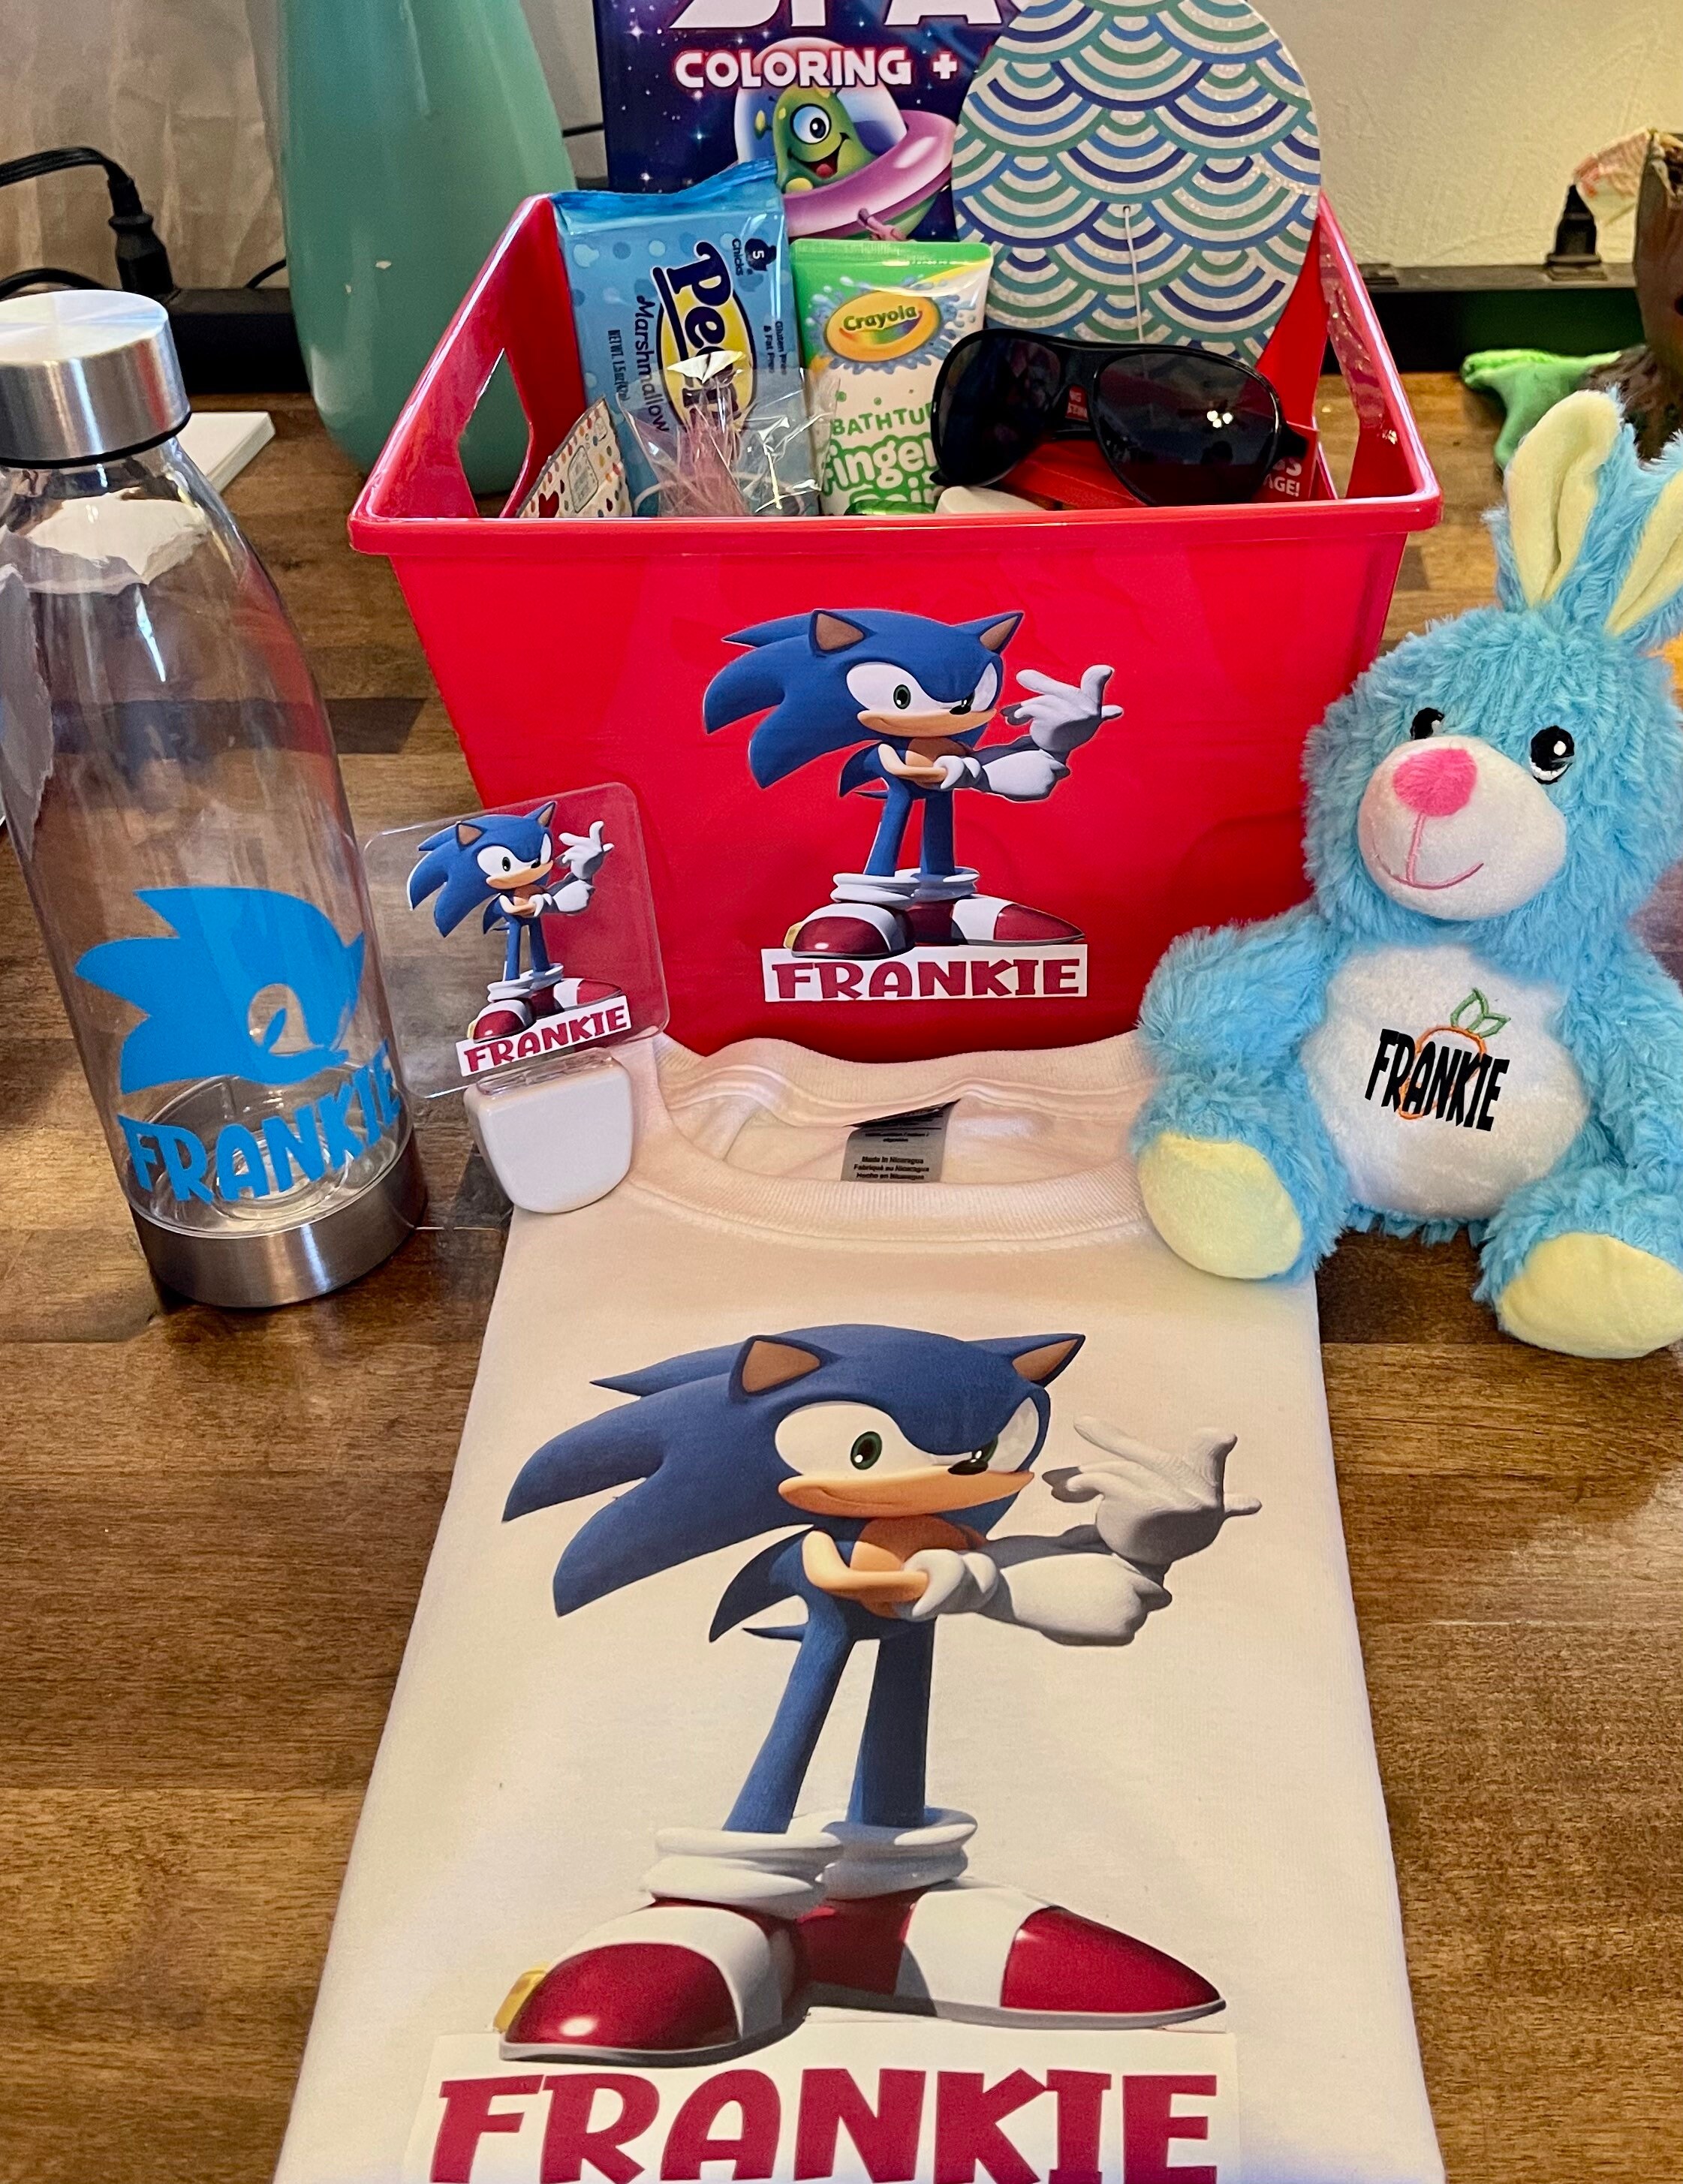 Sonic The Hedgehog - Thank you Funko for this blast from the past